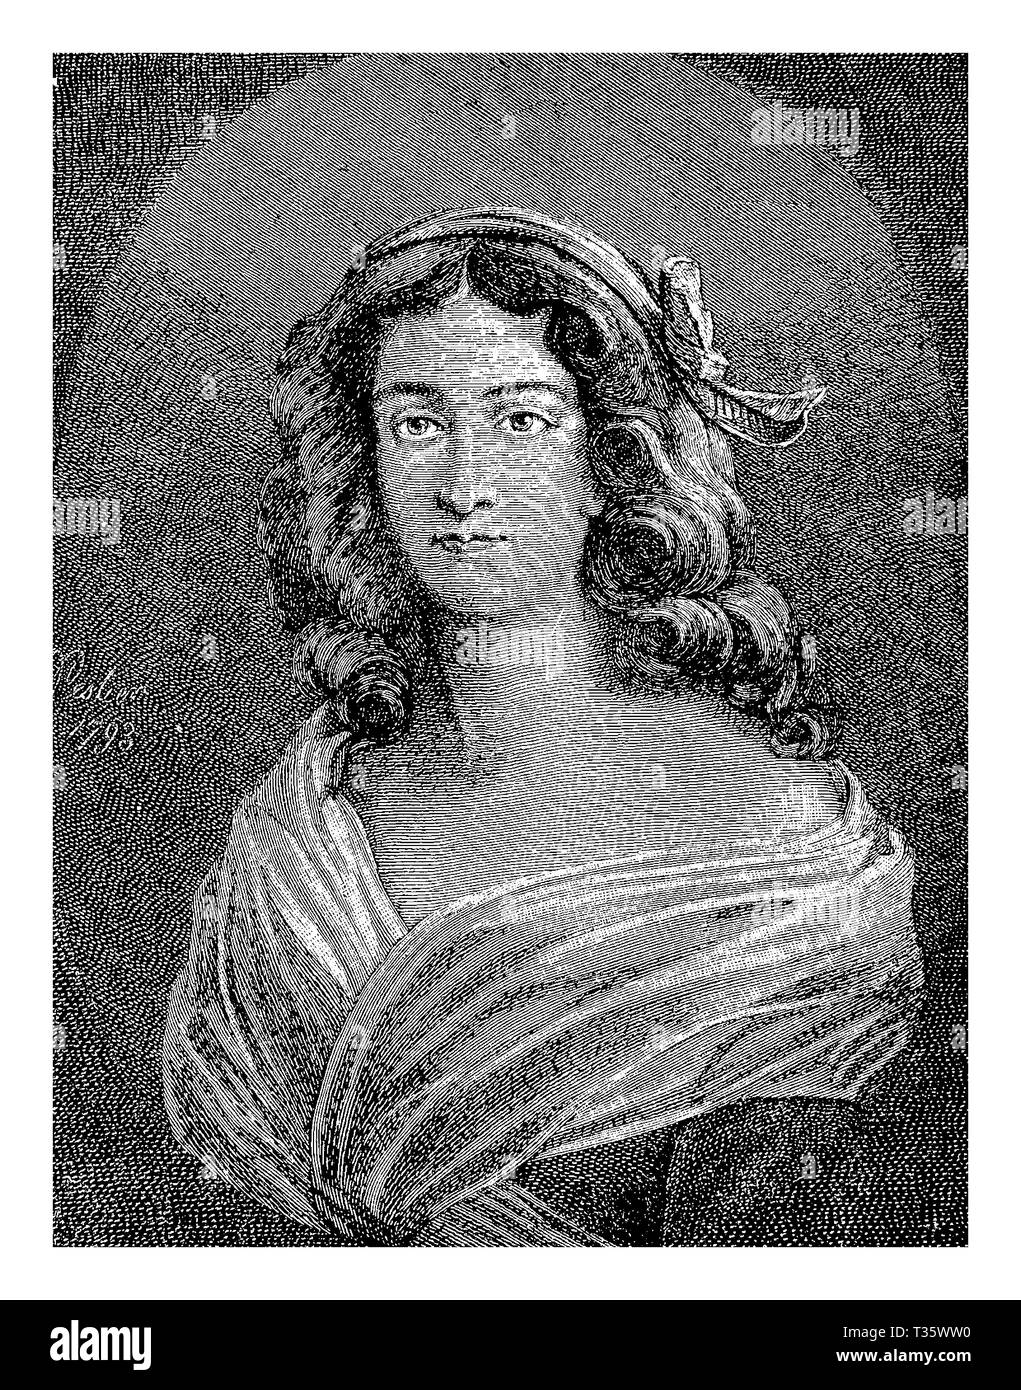 Engraving portrait of Charlotte Corday (1768 - 1793) sympathizer with the Girondins during the French Revolution, guillotined after the assassination of Jean-Paul Marat radical Jacobin leader Stock Photo